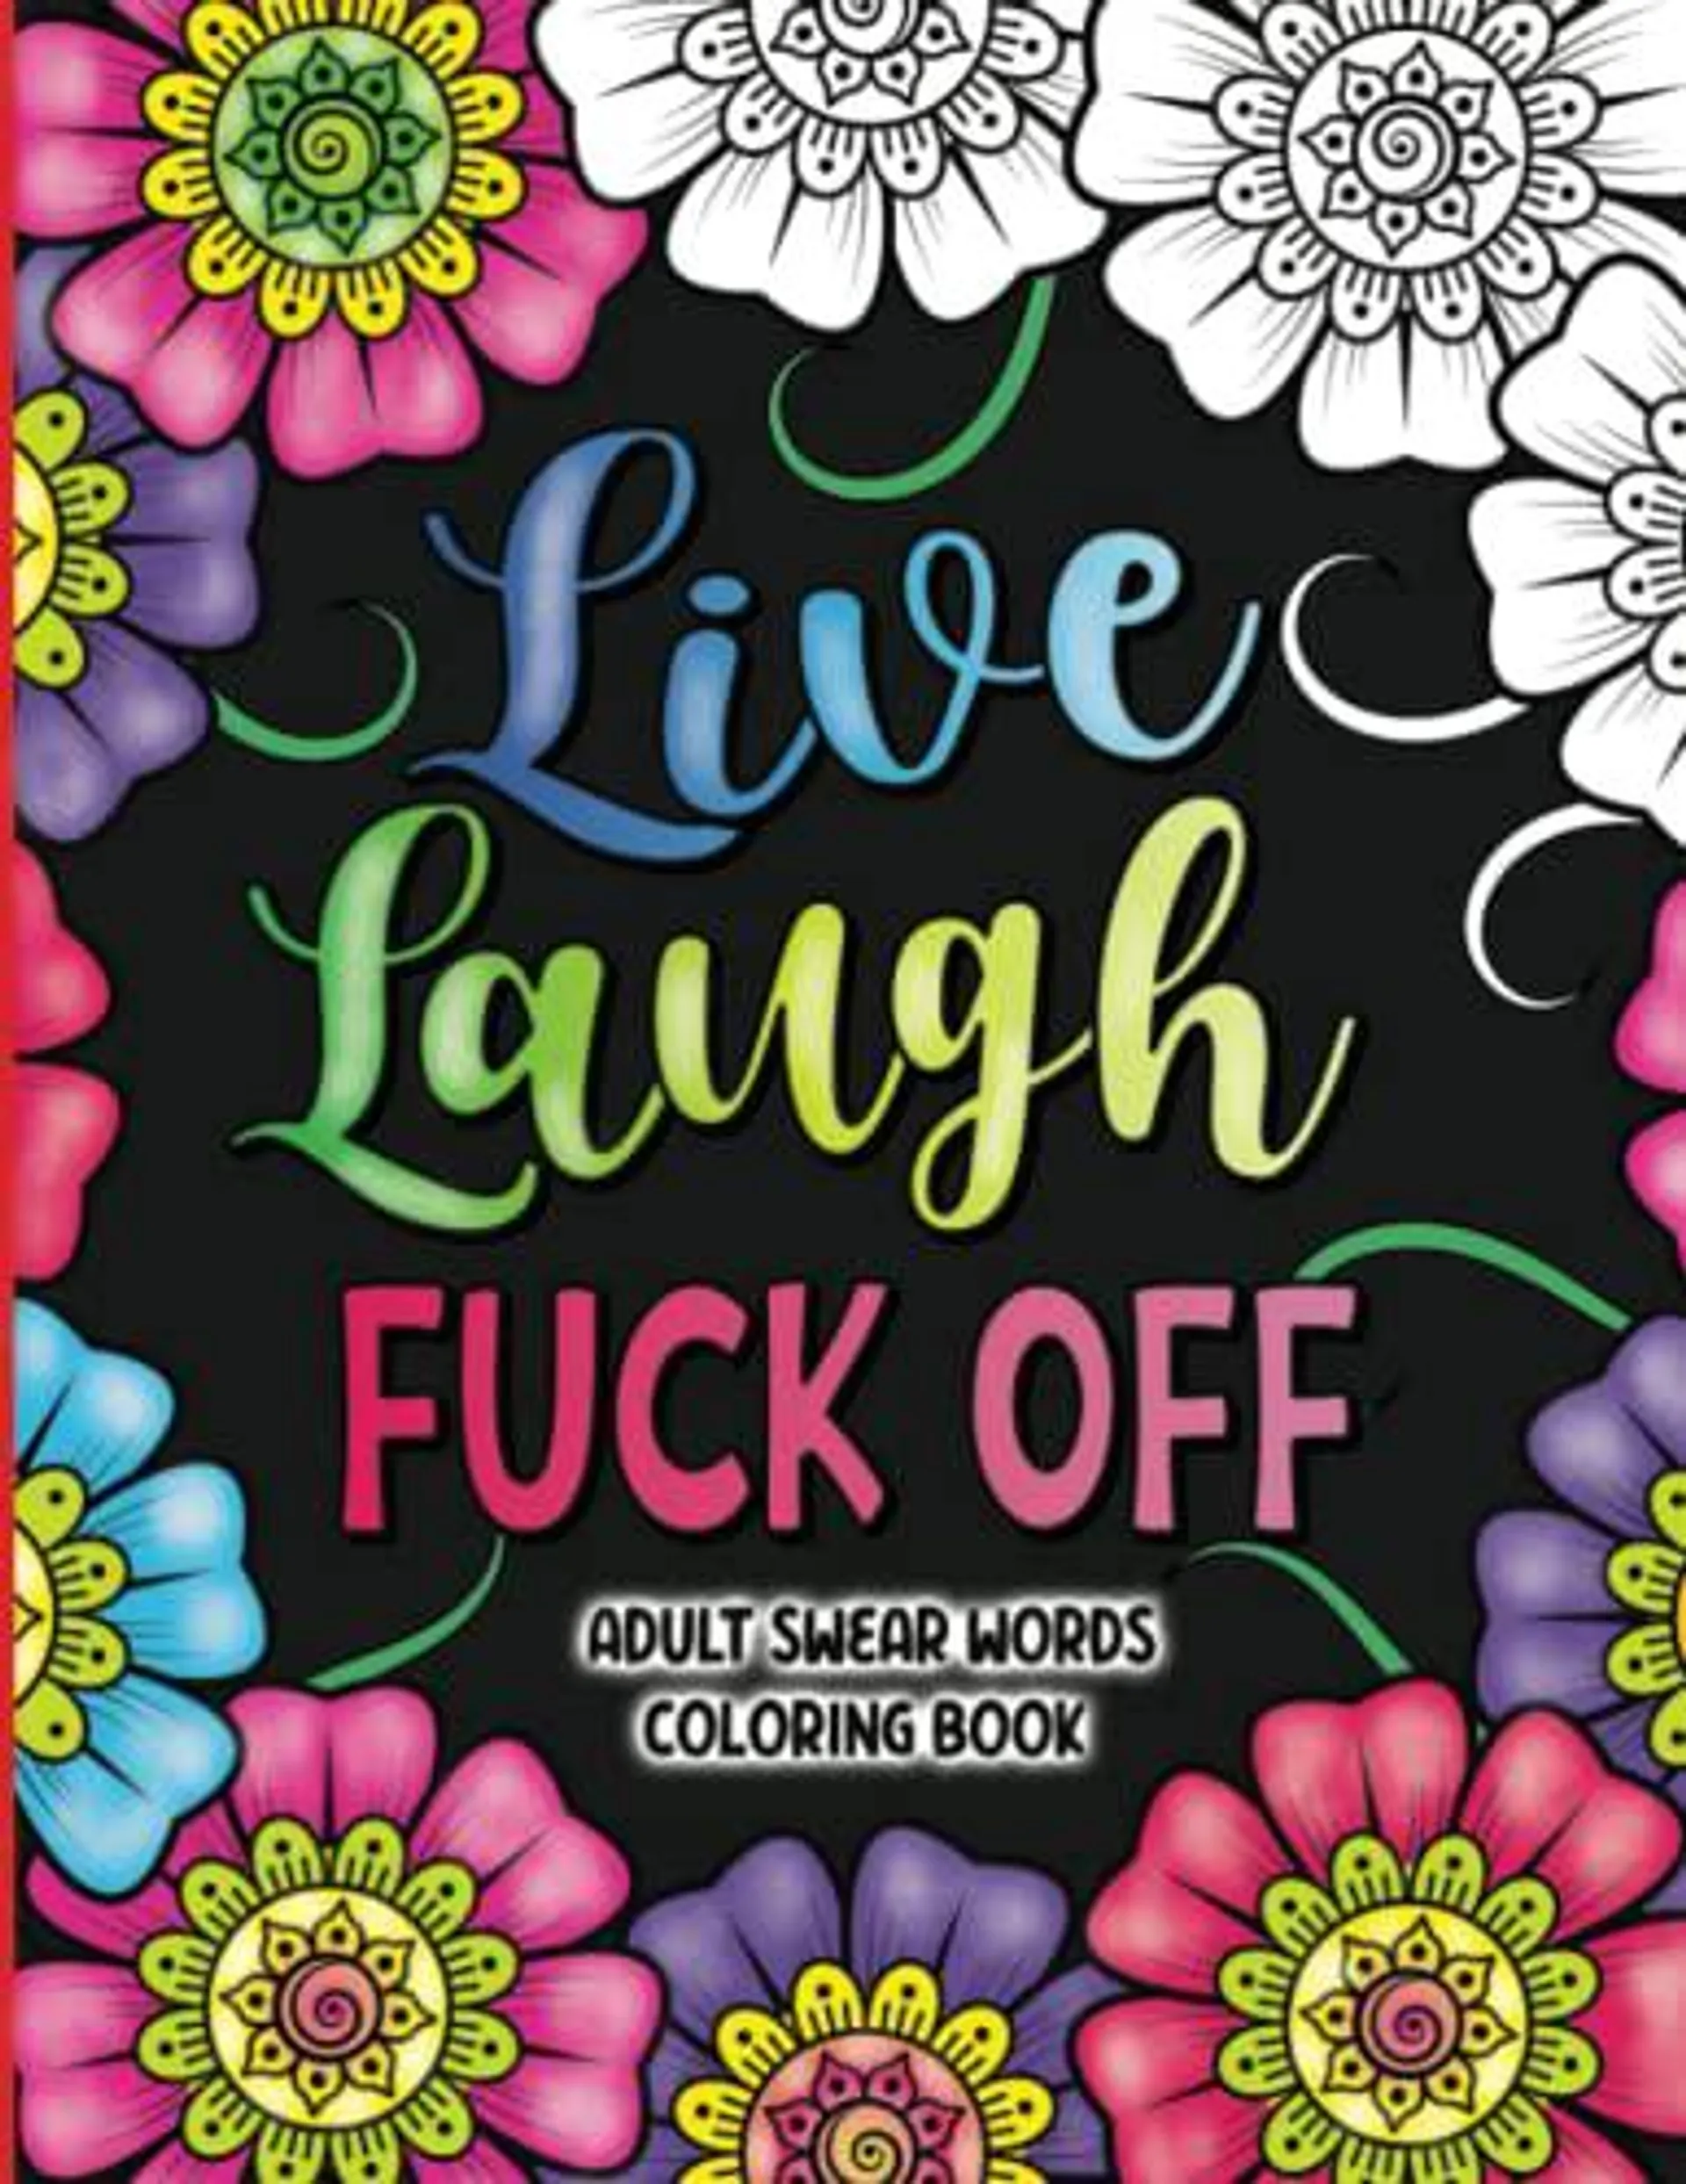 Adult Swear Words Coloring Book: Live, Laugh, Fuck Off: Swear Words Colouring Book for Adults | Sweary Coloring Book for Stress Relief and Relaxation | Adult Coloring Book Cuss Words by Pink Stylish Press